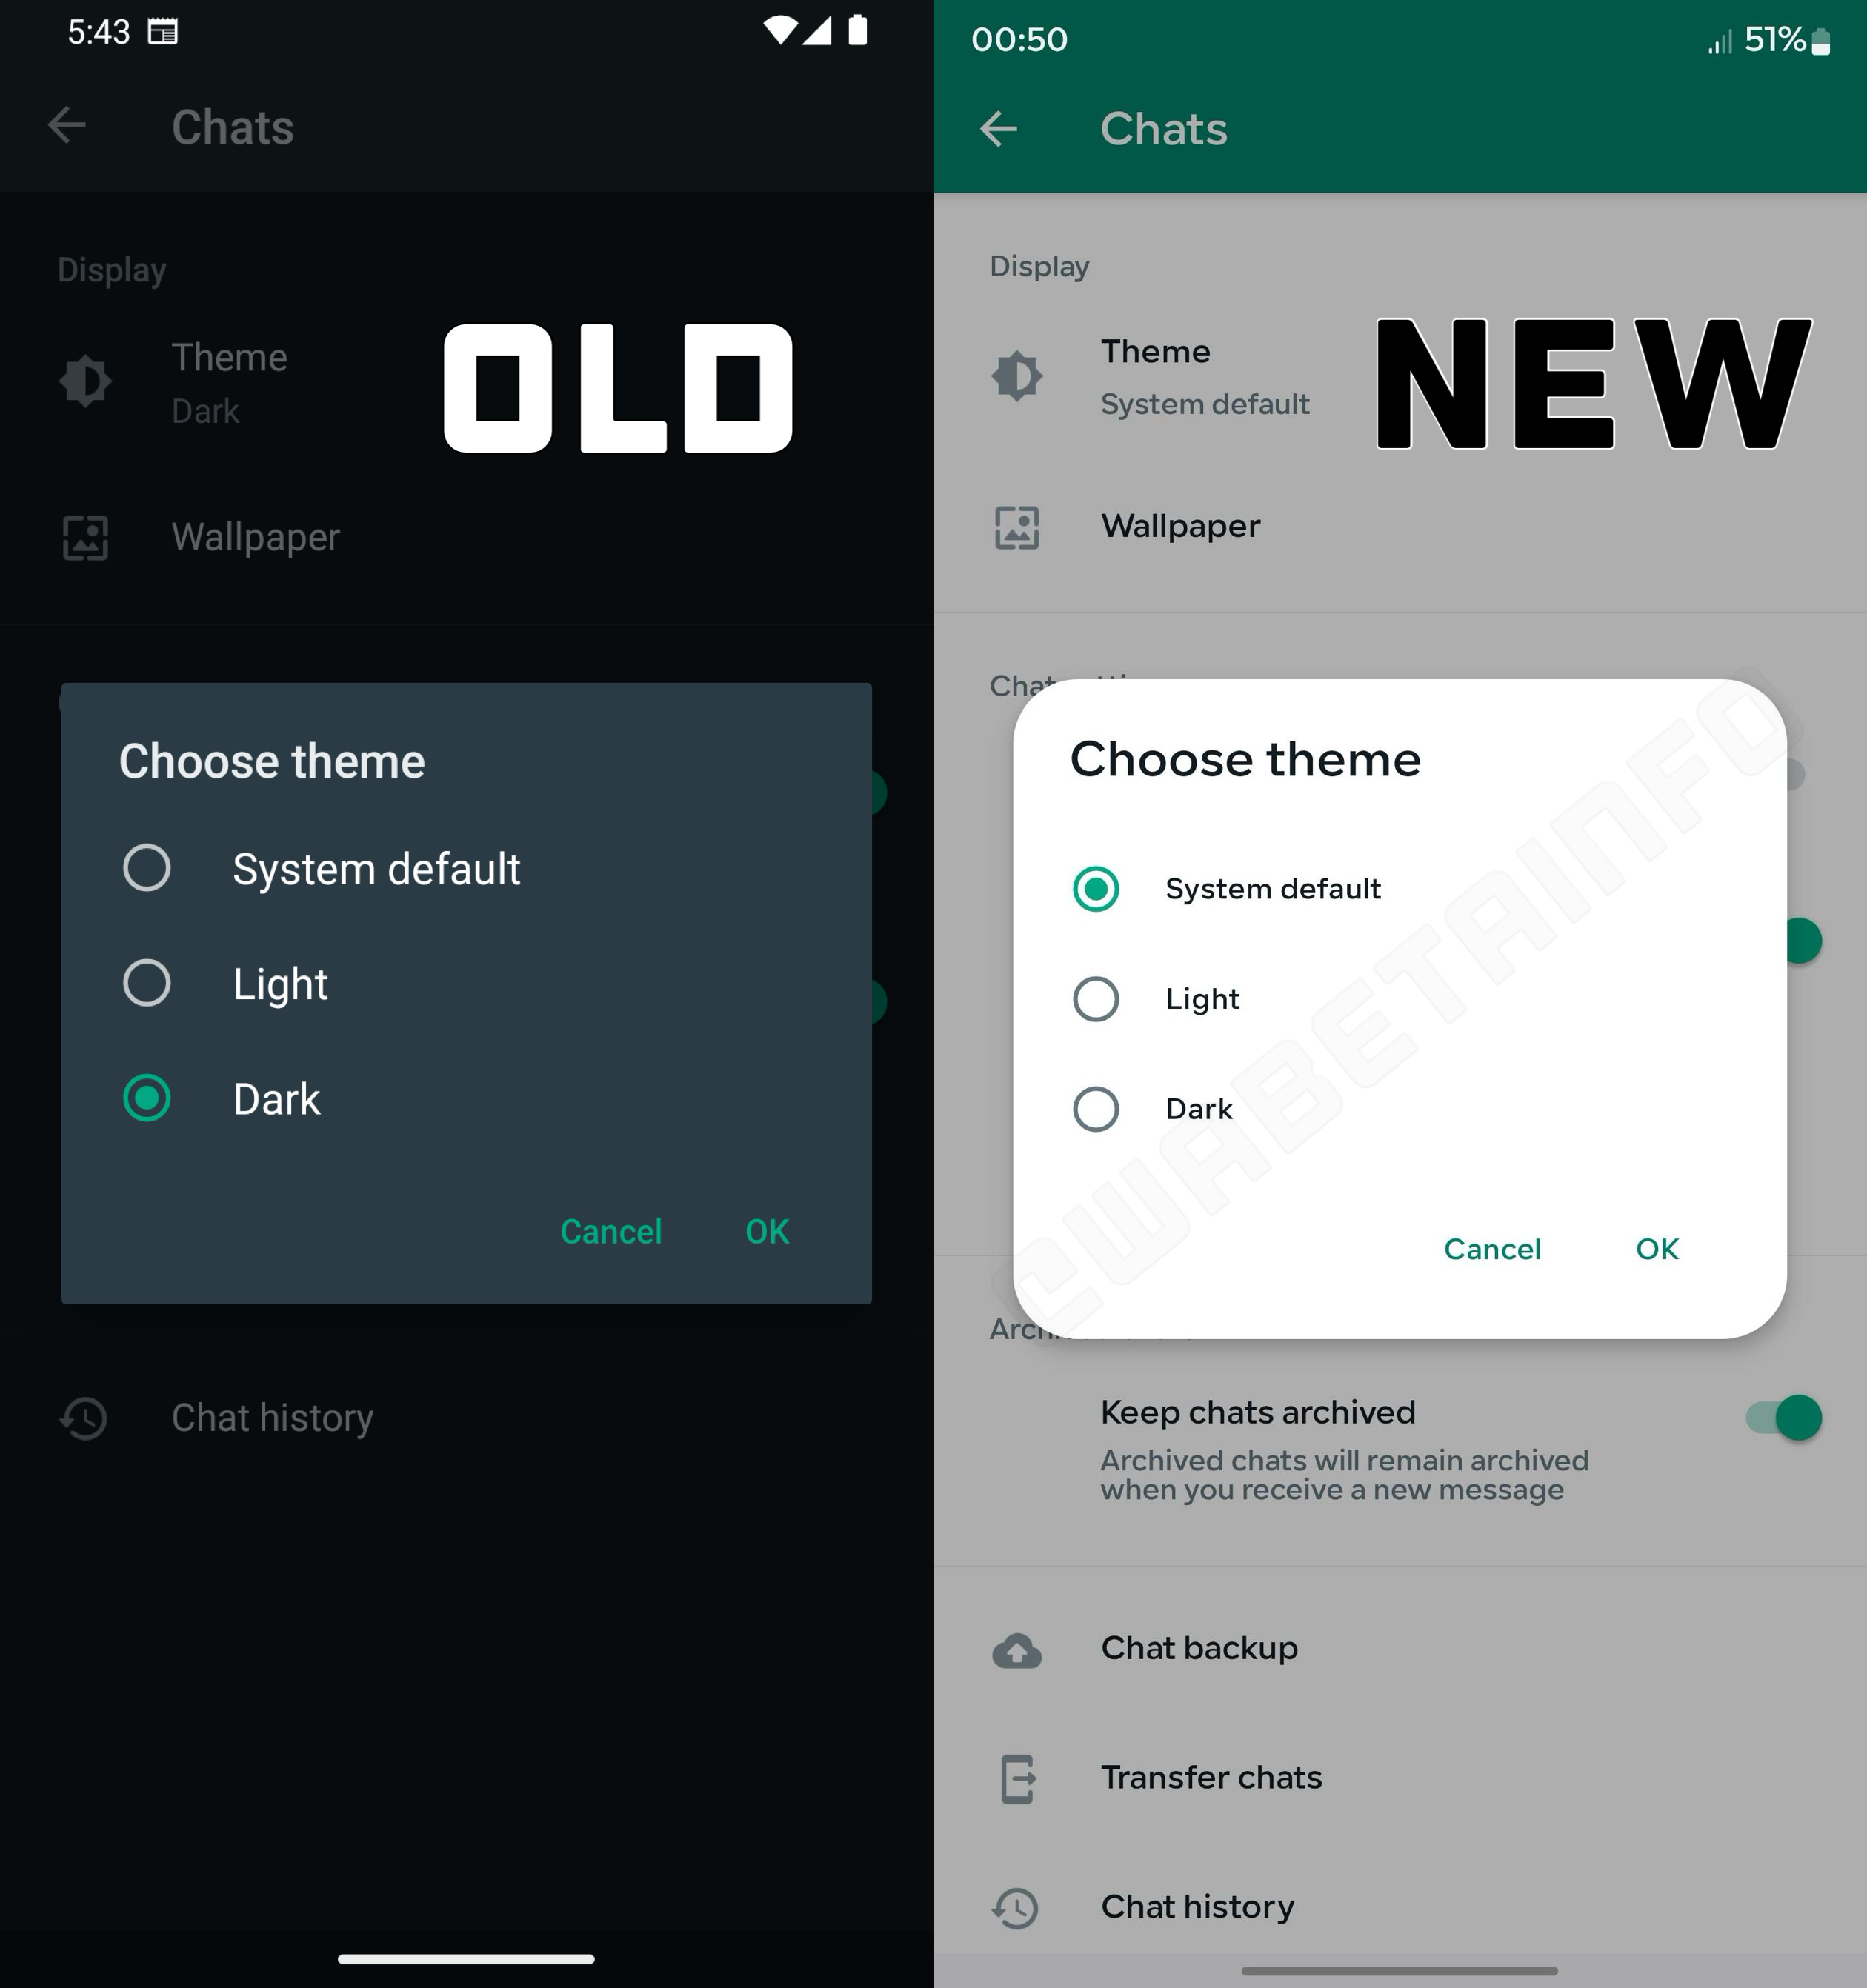 The comparison shows the redesign in the beta version of WhatsApp.